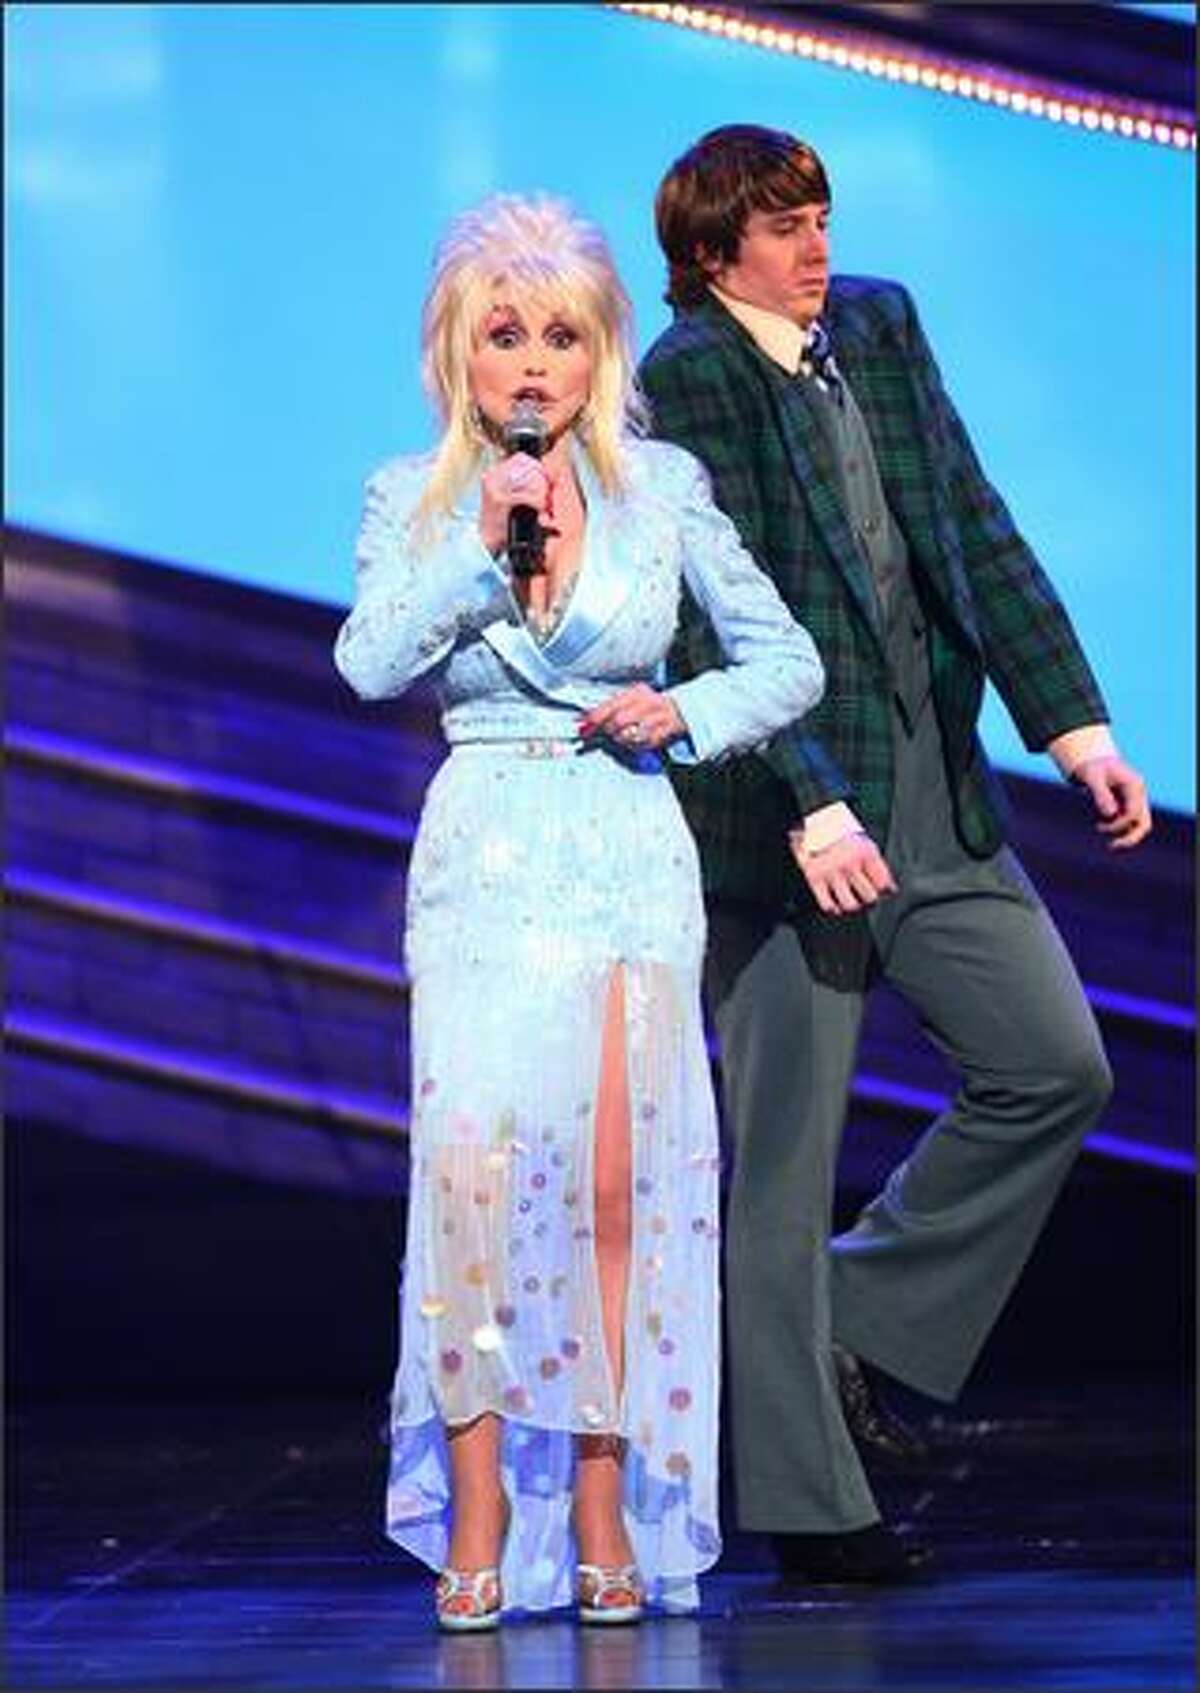 Singer Dolly Parton performs a song from "9 to 5" the musical onstage during the 63rd Annual Tony Awards at Radio City Music Hall on Sunday in New York City.